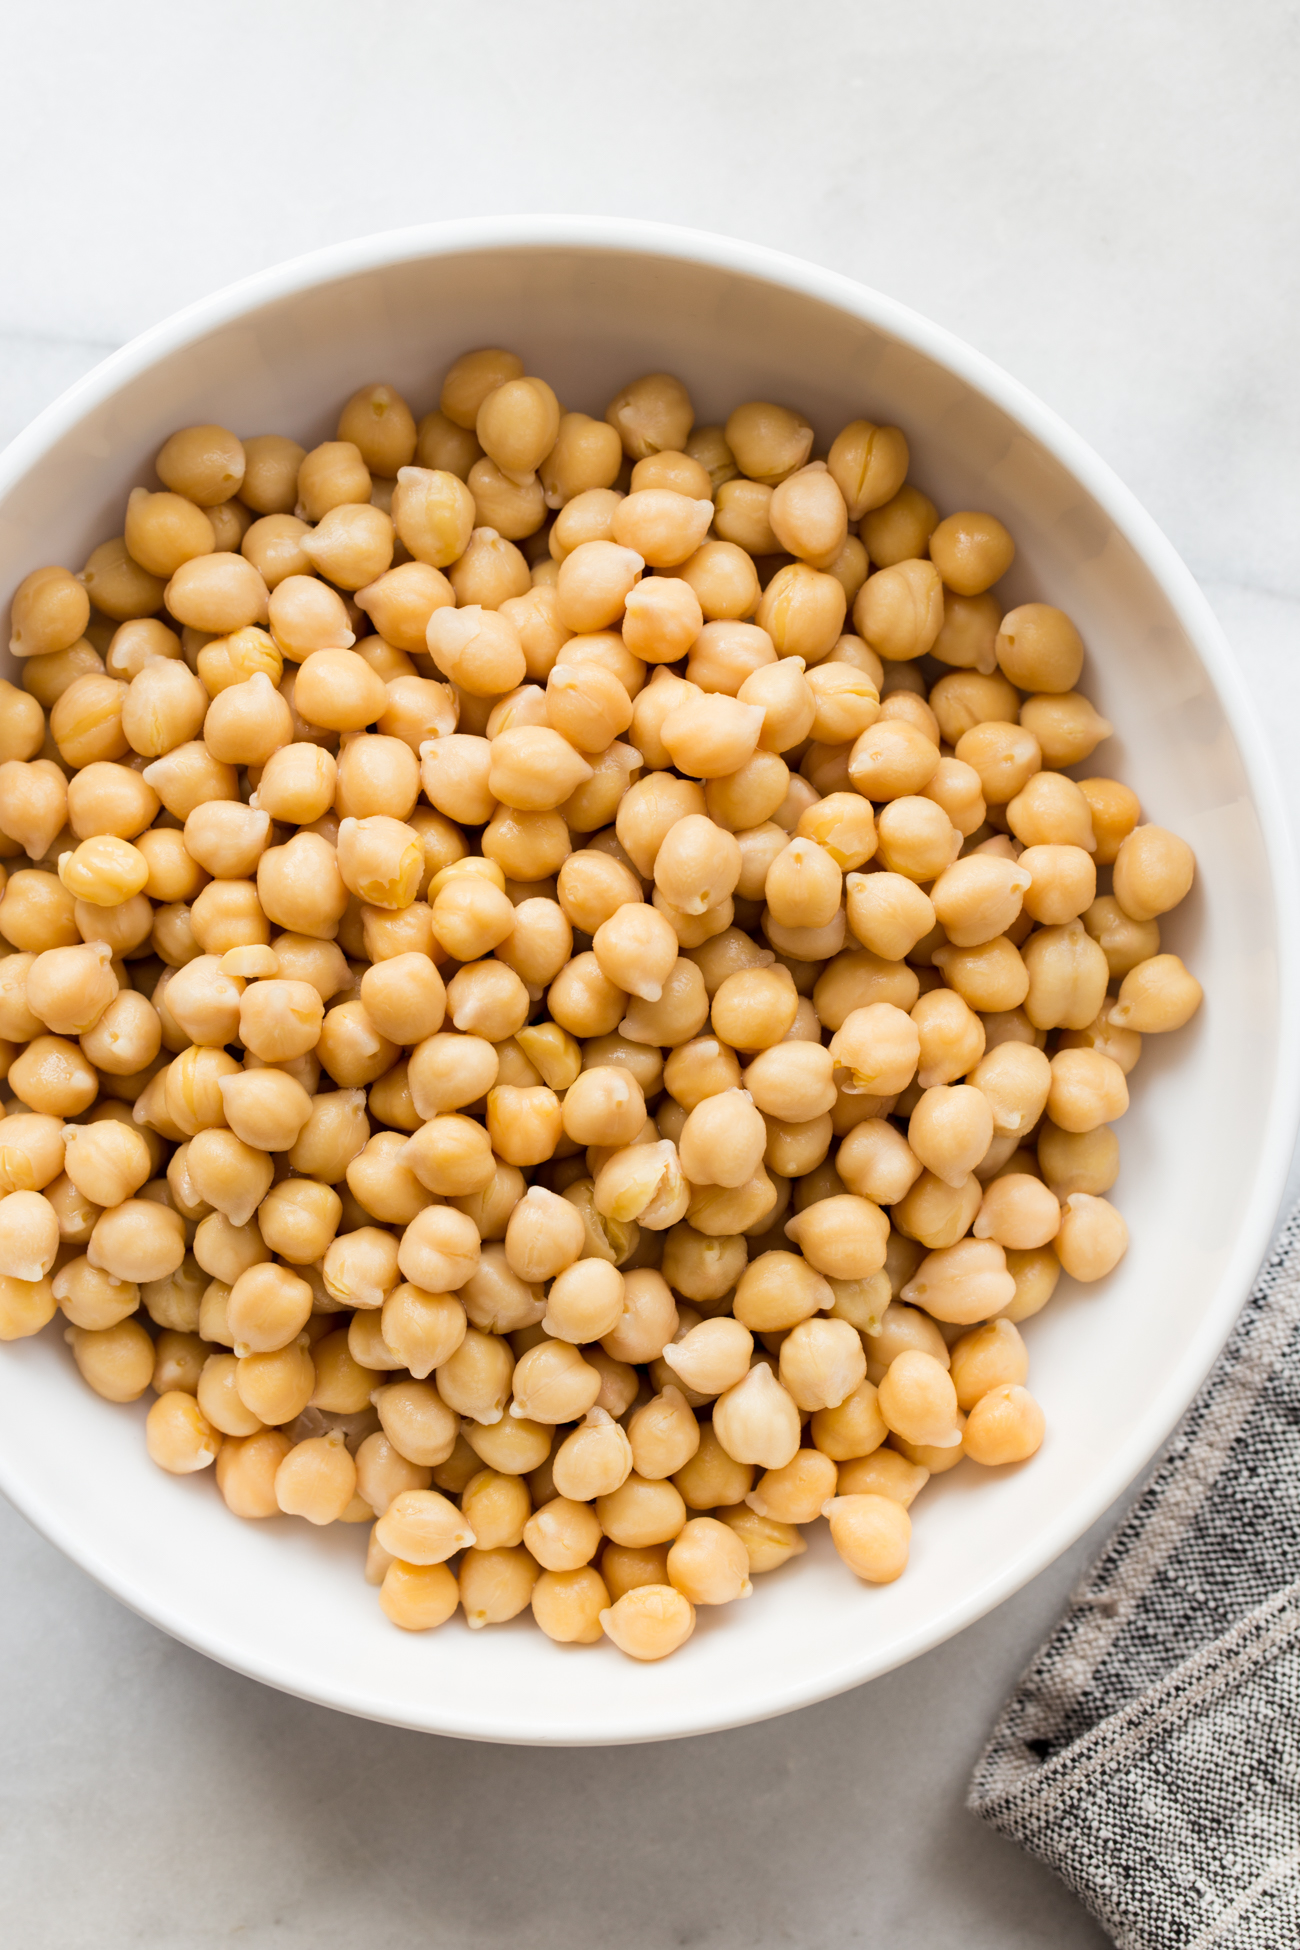 Your New Go-To Meatless Monday Dinner: Quick Chickpea Stir Fry